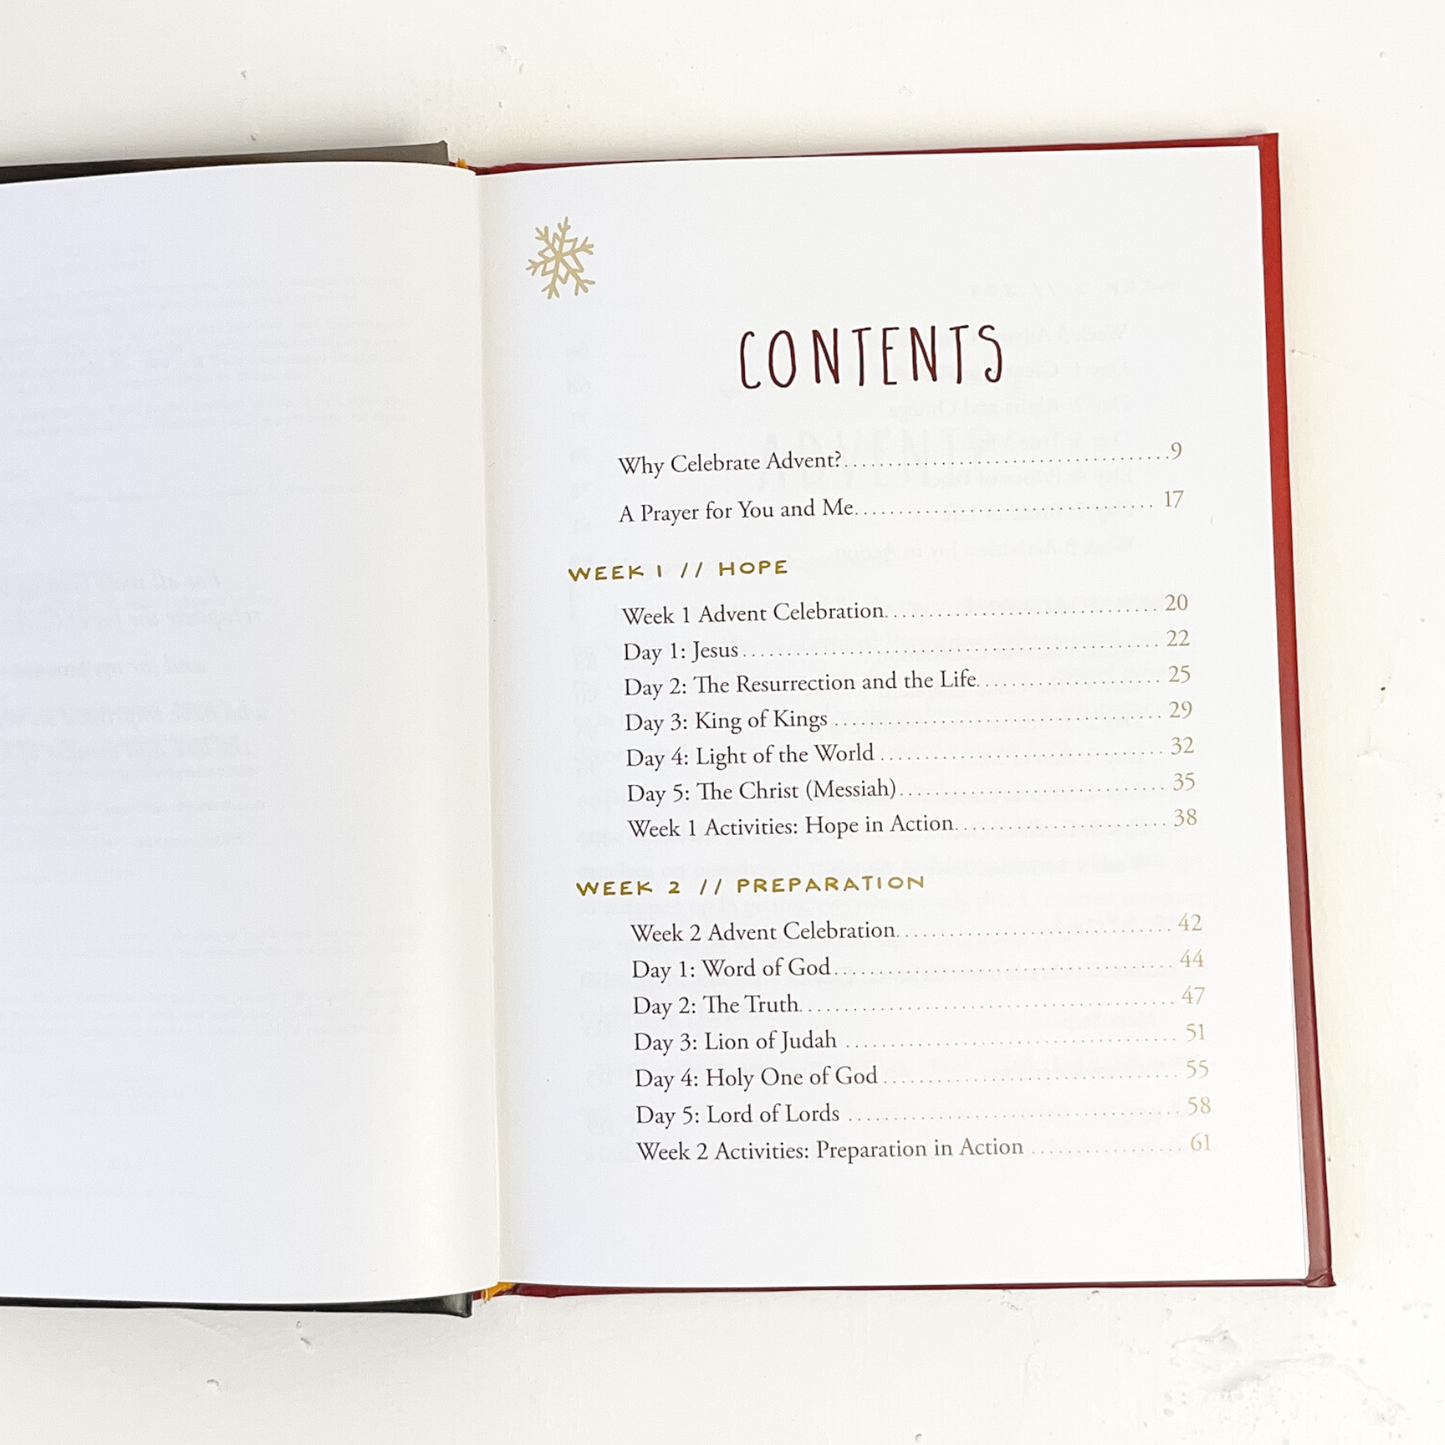 Signed Copy of Unwrapping the Names of Jesus: An Advent Devotional